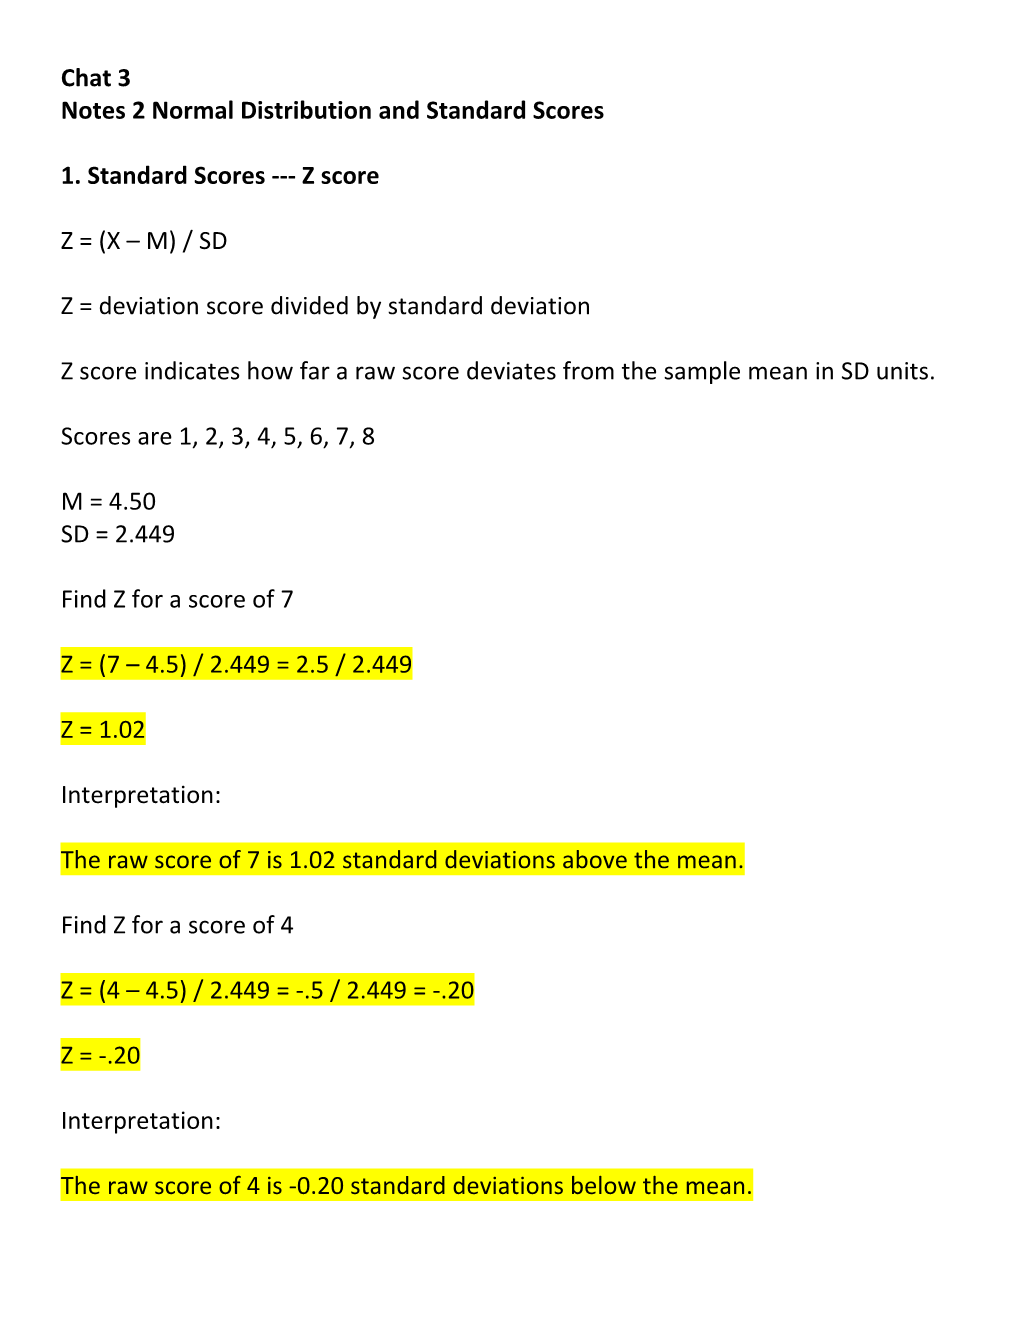 Notes 2 Normal Distribution and Standard Scores